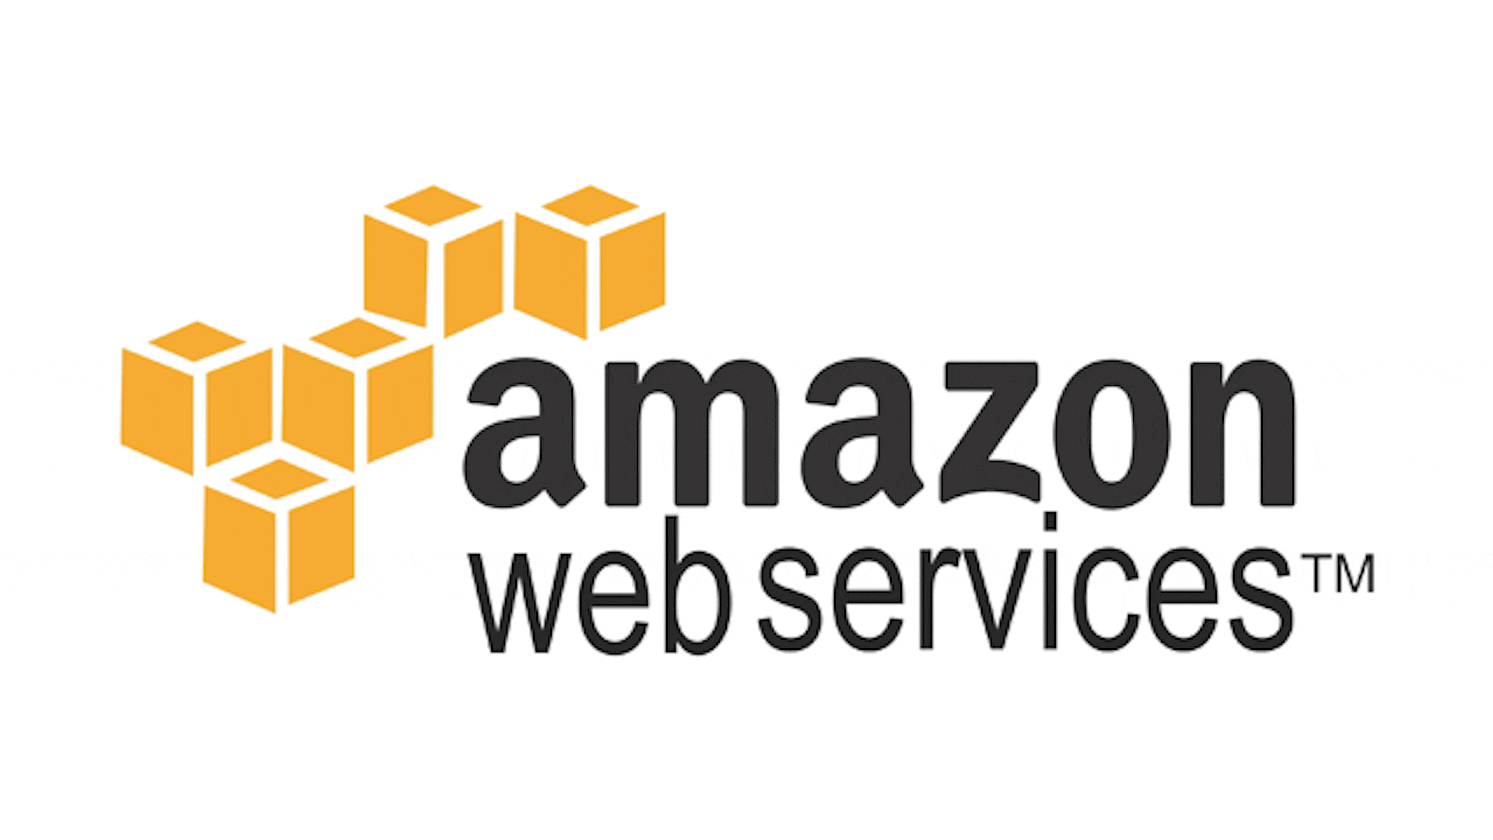 Creating instance in AWS using cli